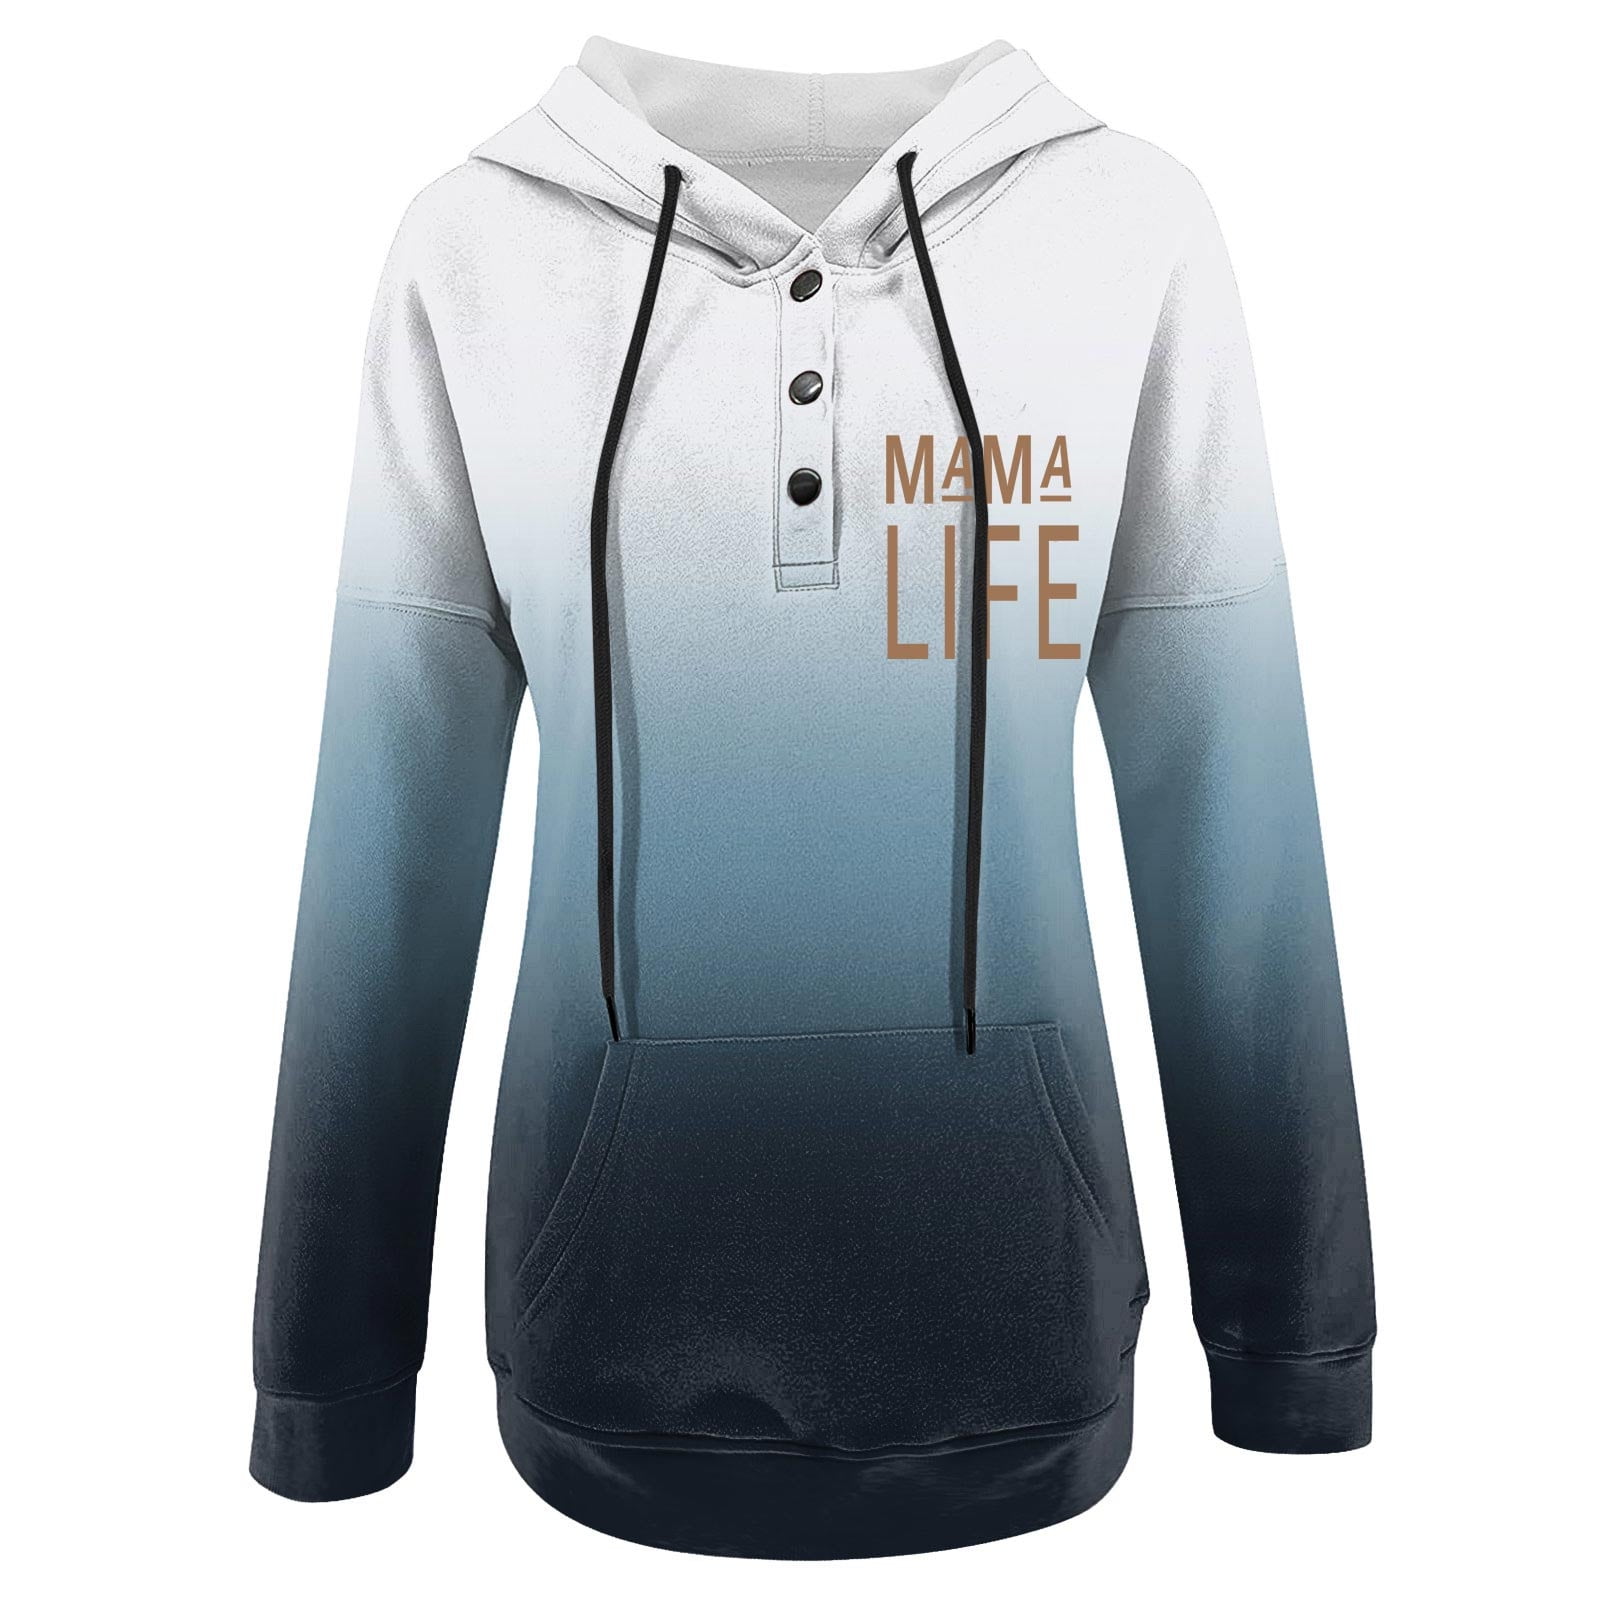 Stylish Sweatshirts for Women Online at Best Prices on a la mode